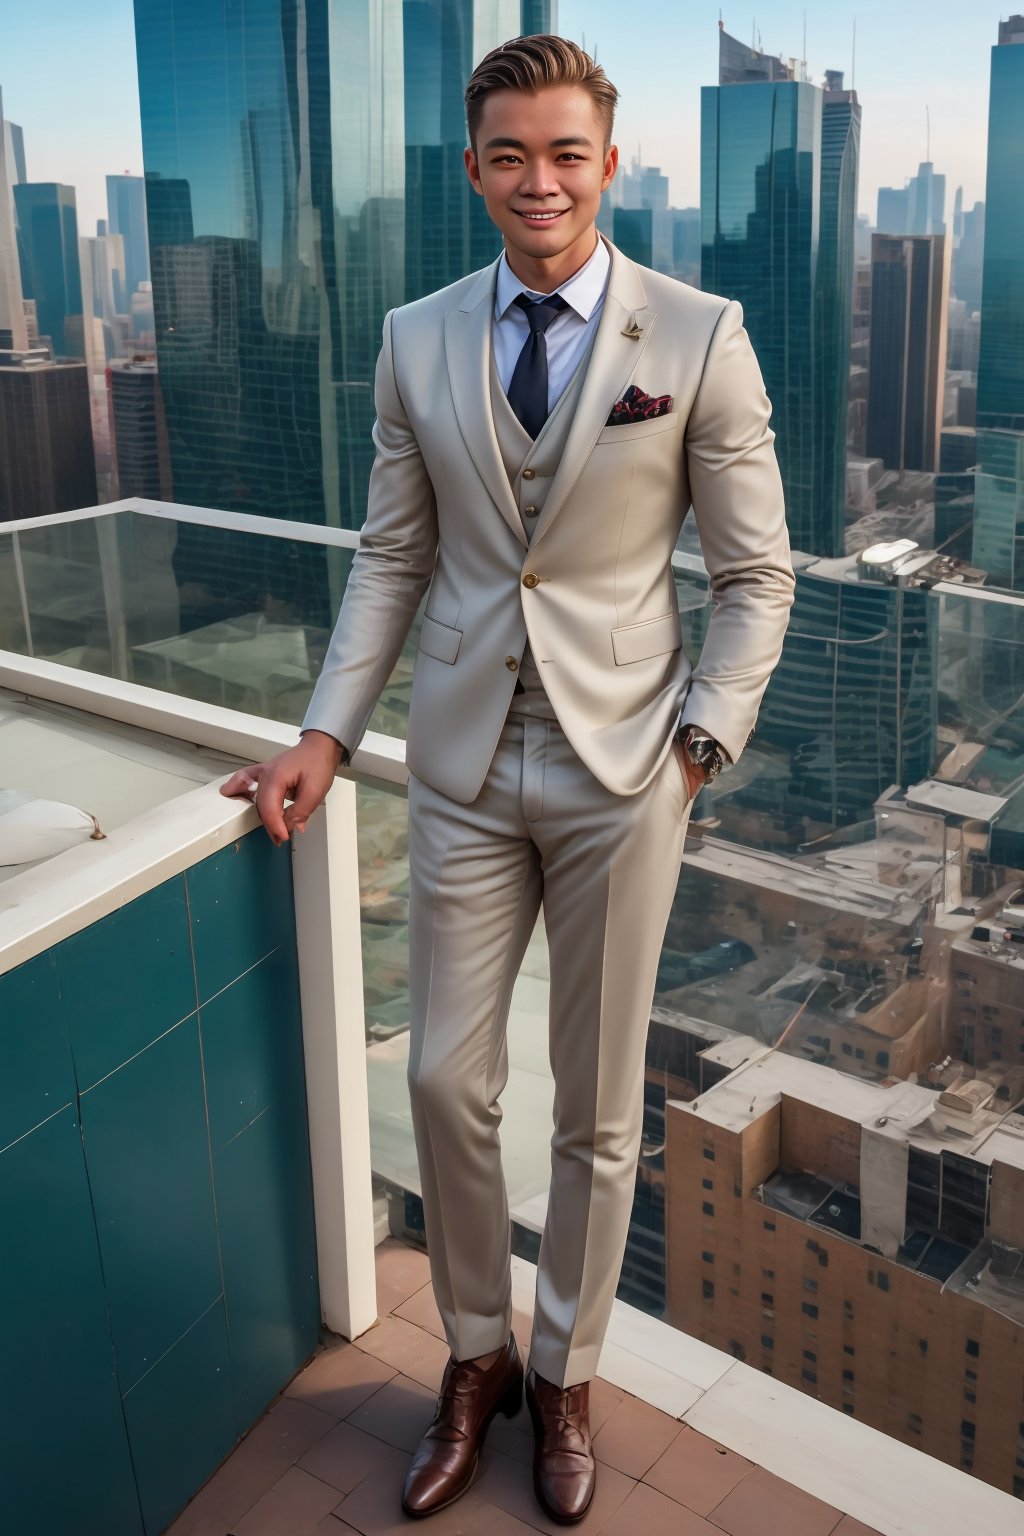 Handsome Chinese male, 30 years old, handsome, attractive, sunny, smiling, wearing a handsome suit, standing on the top of a skyscraper